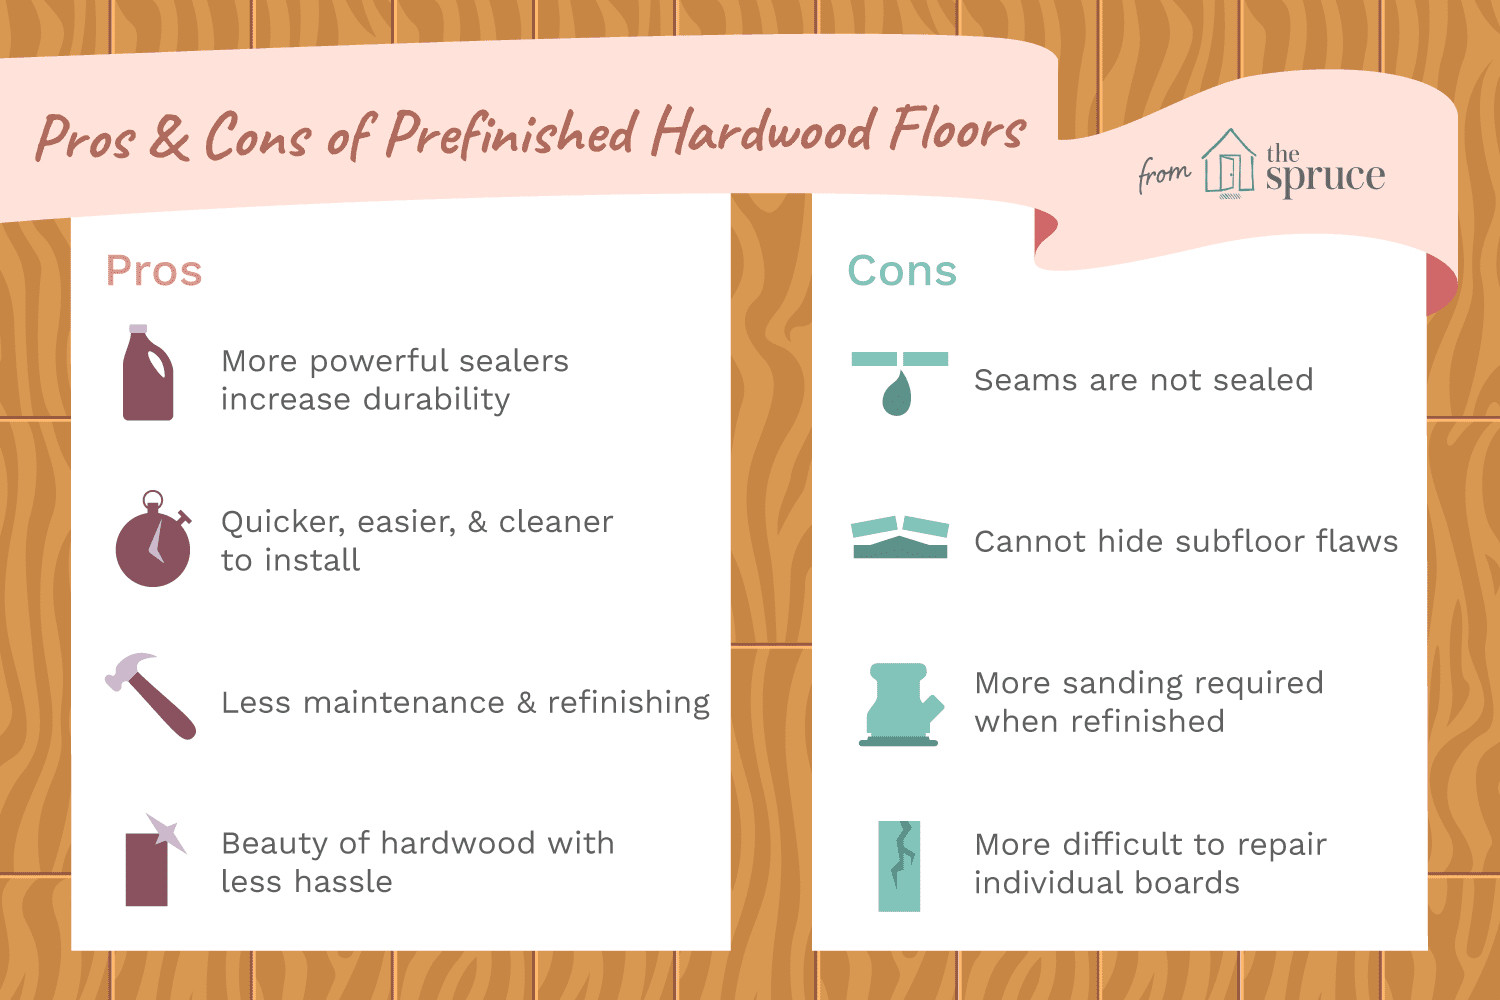 16 Amazing Hardwood Floor Refinishing Vs Resurfacing 2024 free download hardwood floor refinishing vs resurfacing of the pros and cons of prefinished hardwood flooring within prefinished hardwood floors